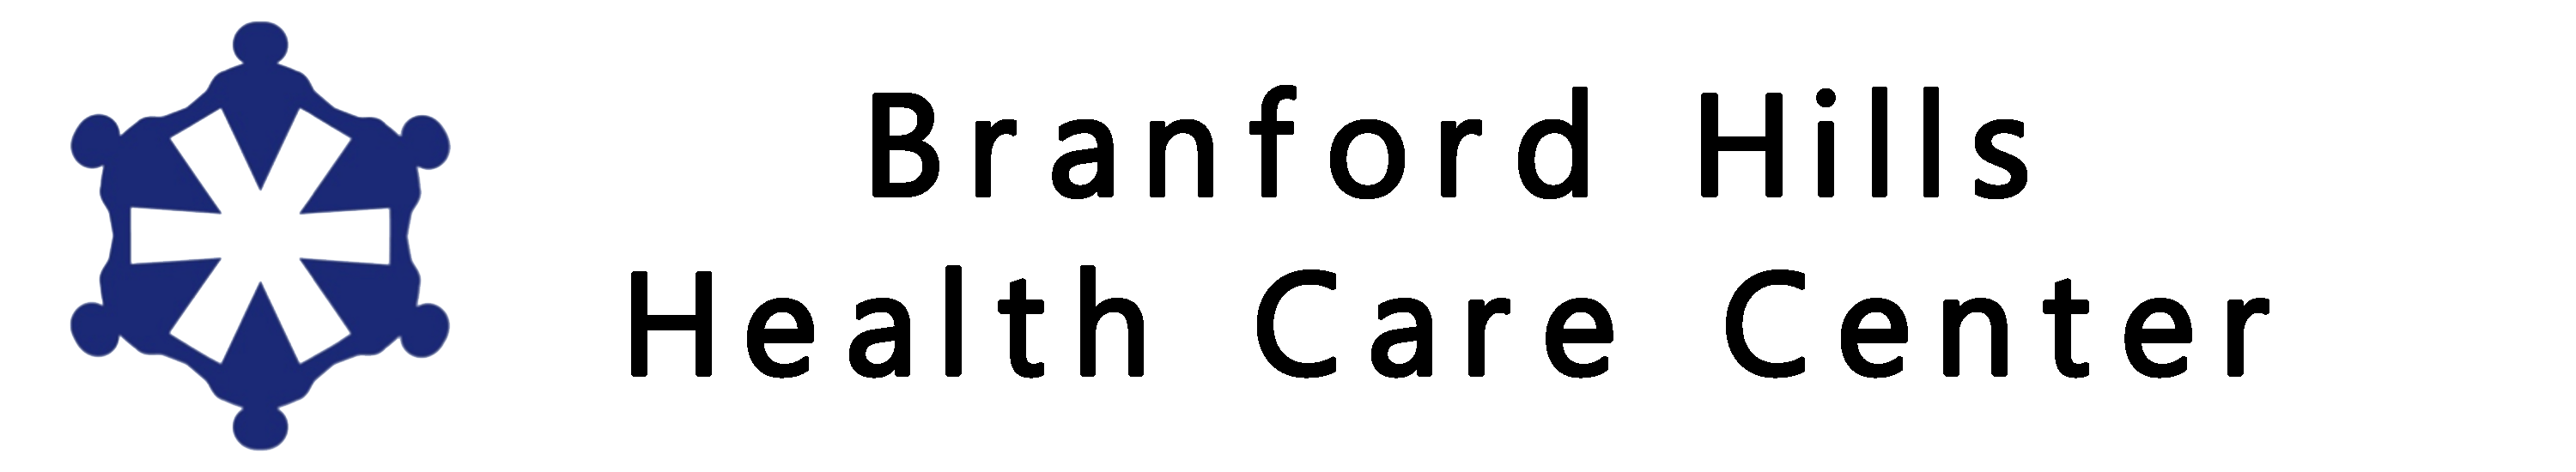 Branford Hills Health Care_Allied Communications